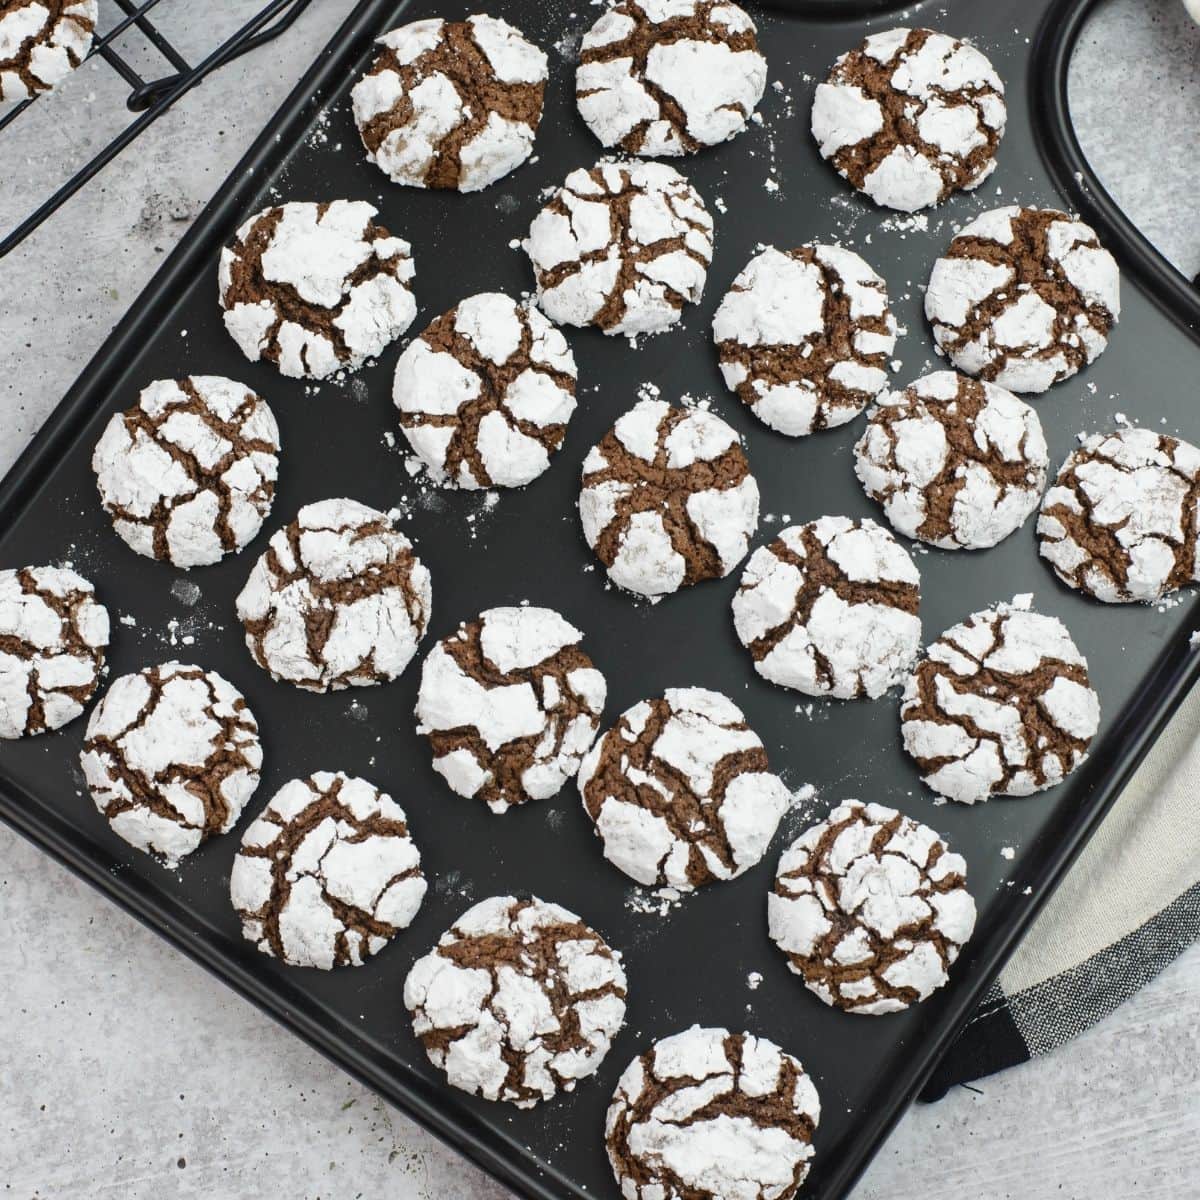 Serving chocolate crinkle cookies on a black glass serving tray.